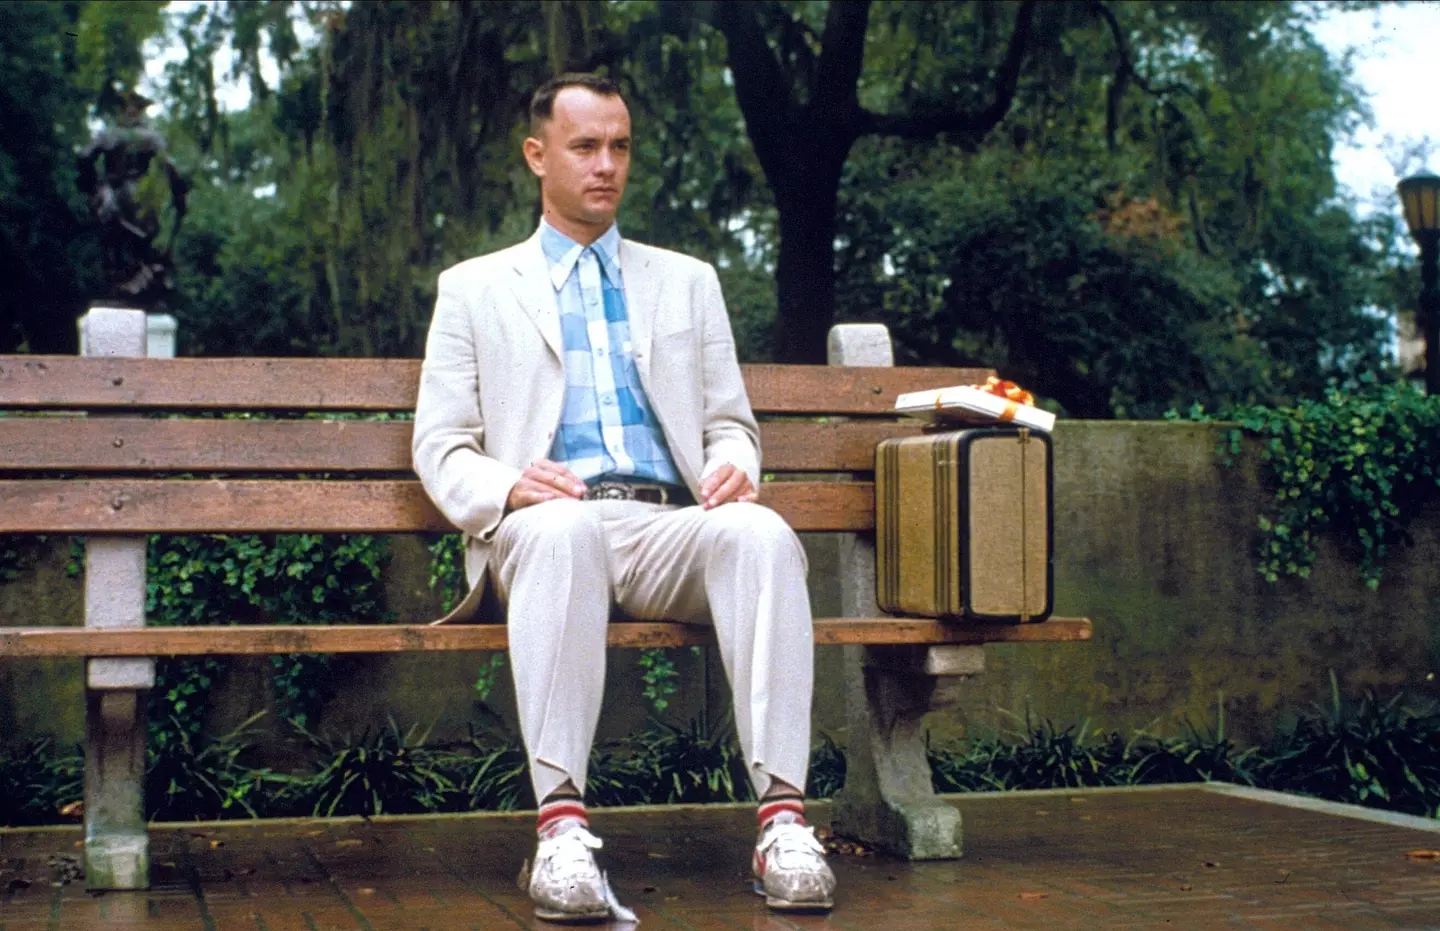 Hanks said his performance in Forrest Gump was one of few films he gave it his all.